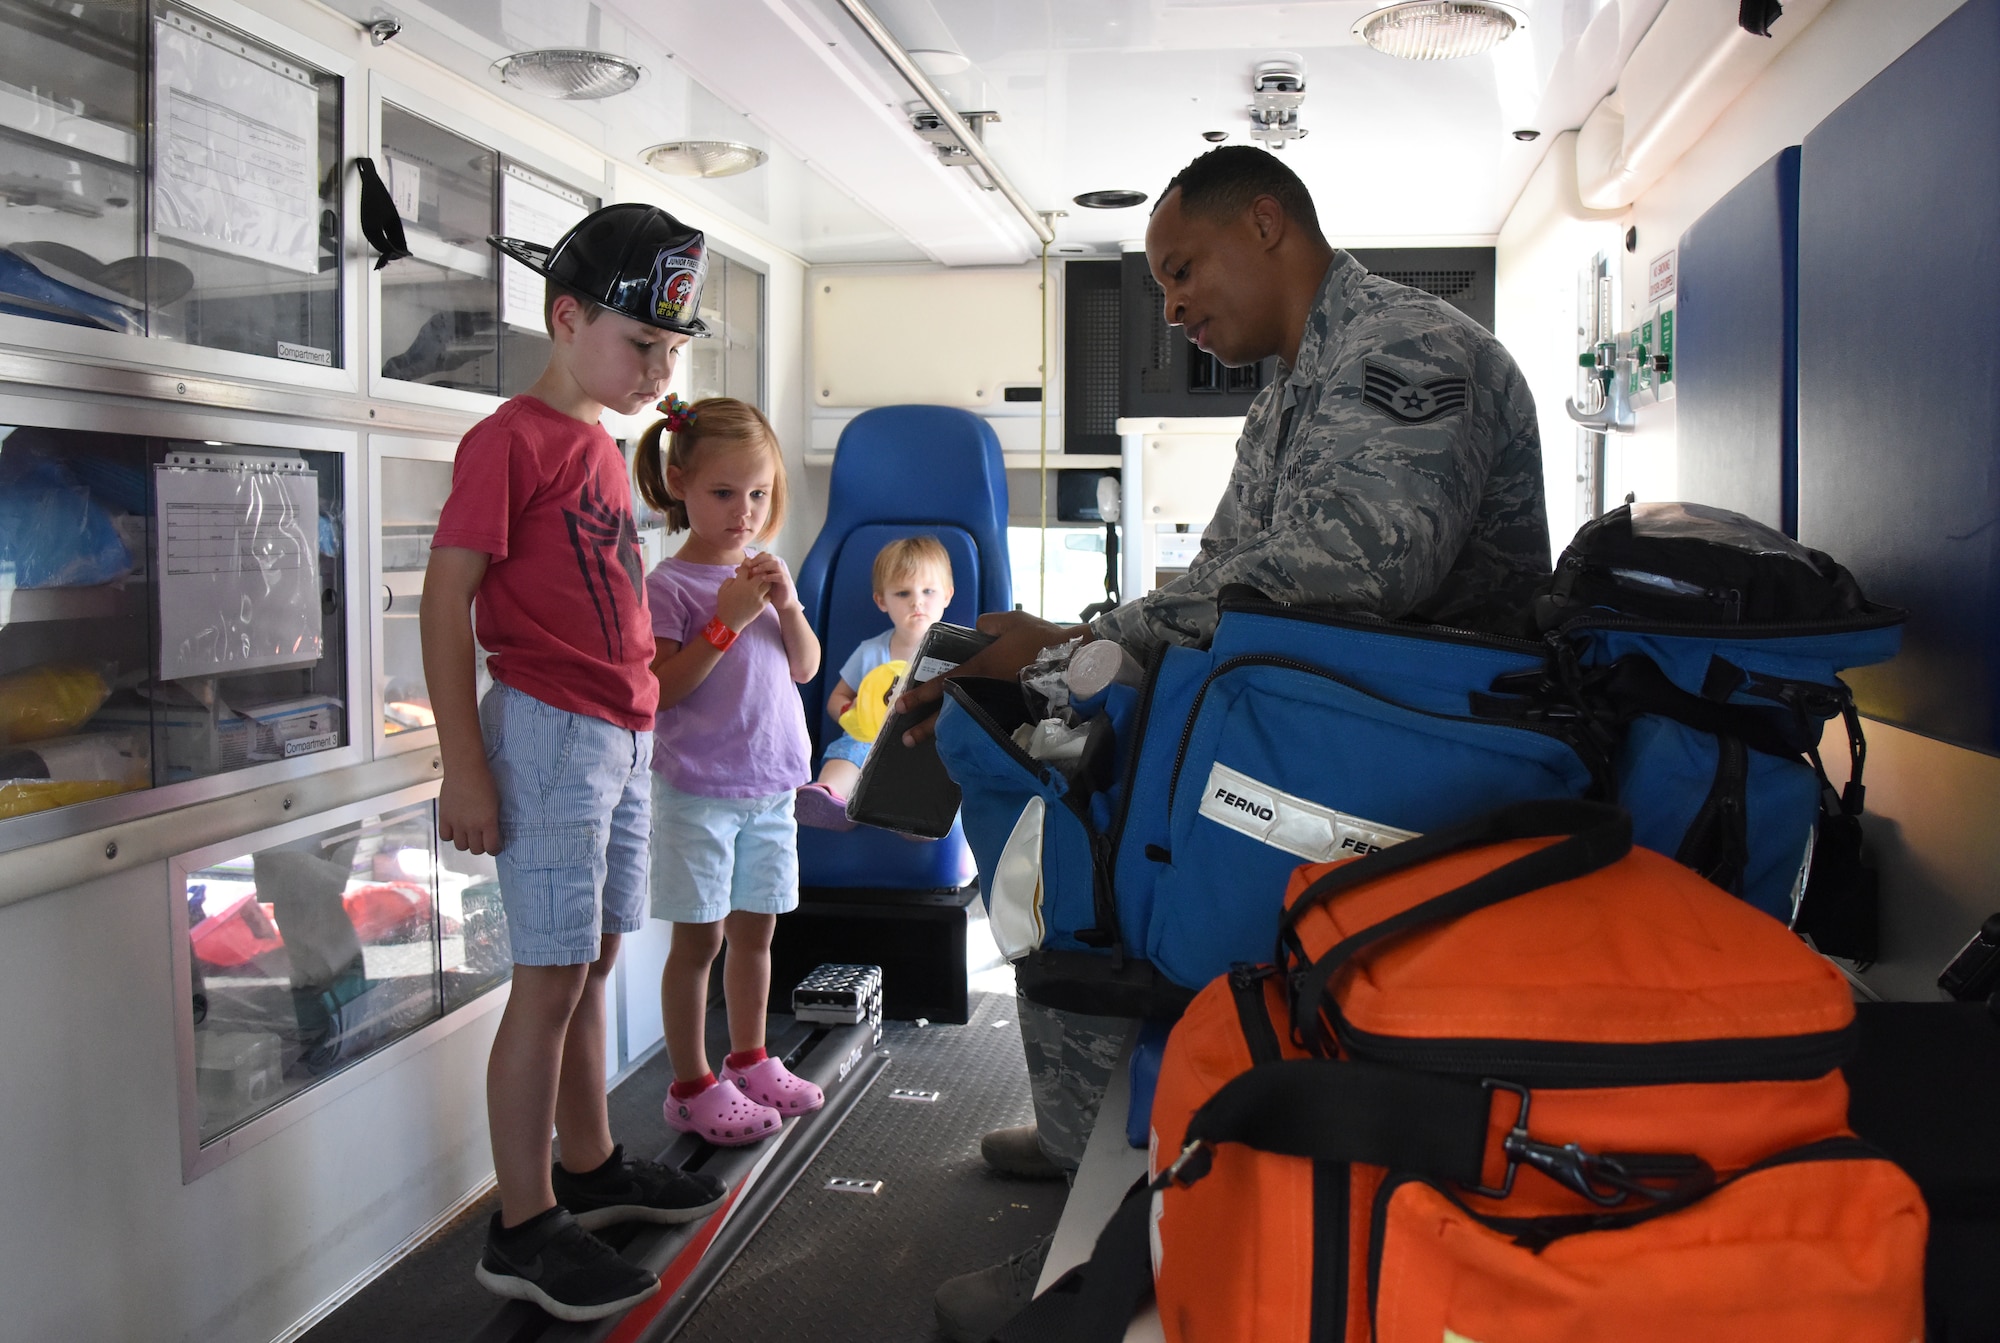 U.S. Air Force Staff Sgt. Andre White, 81st Medical Operations Squadron medical technician, speak to children about ambulance medical contents during a open house at the fire station at Keesler Air Force Base, Mississippi, Oct. 13, 2018. Keesler celebrated Fire Prevention Week by conducting random fire drills, visiting various facilities with Sparky the Fire Dog, and conducting an open house at the fire department while providing stove and fire extinguisher demonstrations. (U.S. Air Force photo by Kemberly Groue)